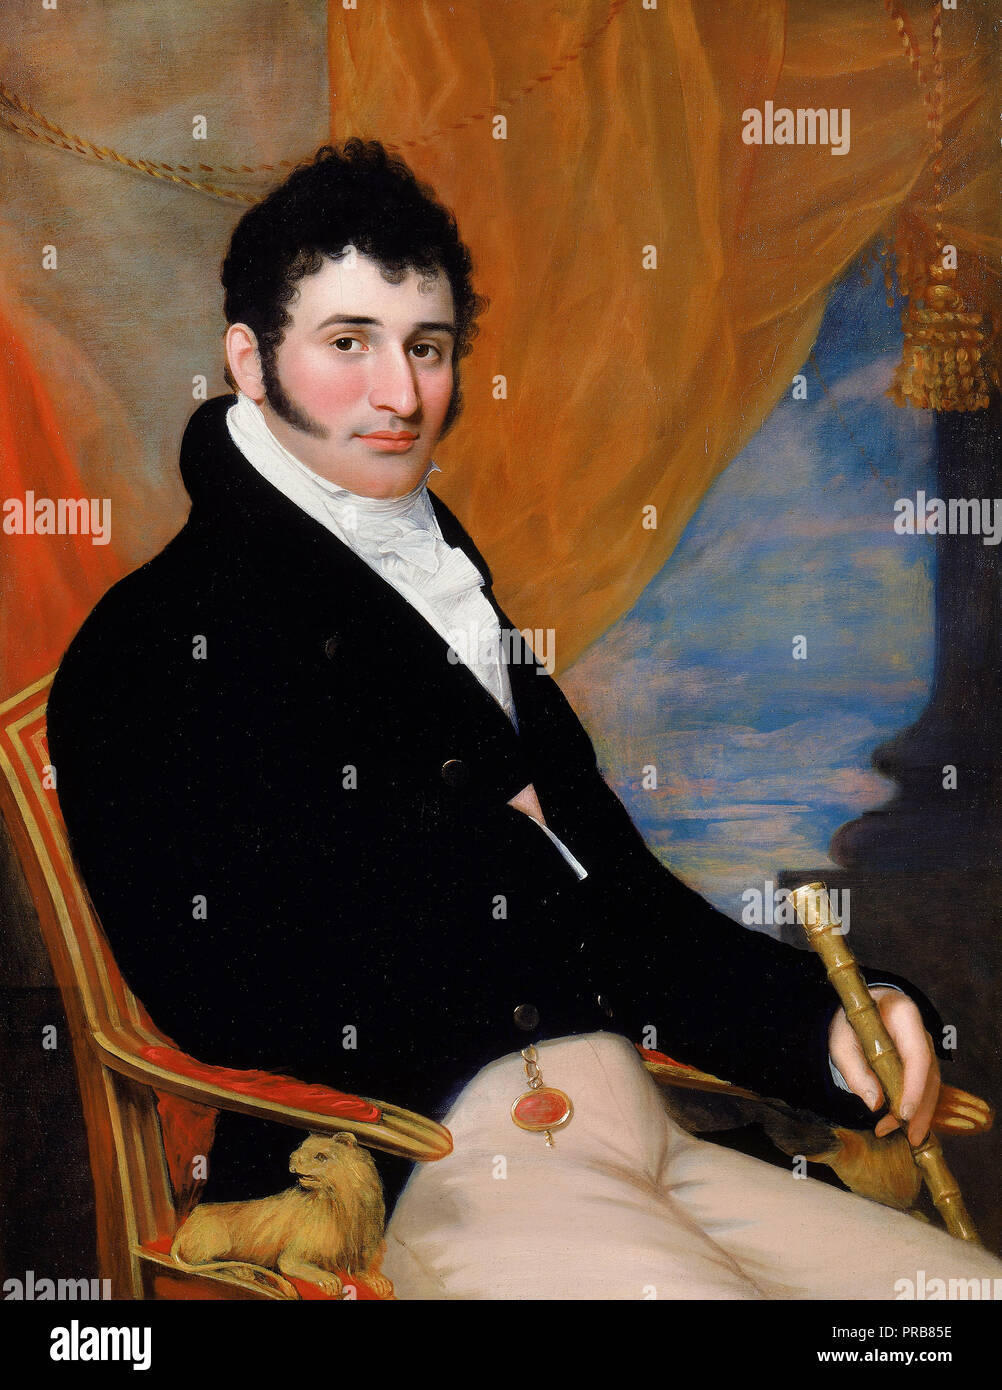 John Wesley Jarvis, Portrait of Solomon Isaacs, Circa 1813, Oil on canvas, The Jewish Museum, New York City, USA. Stock Photo